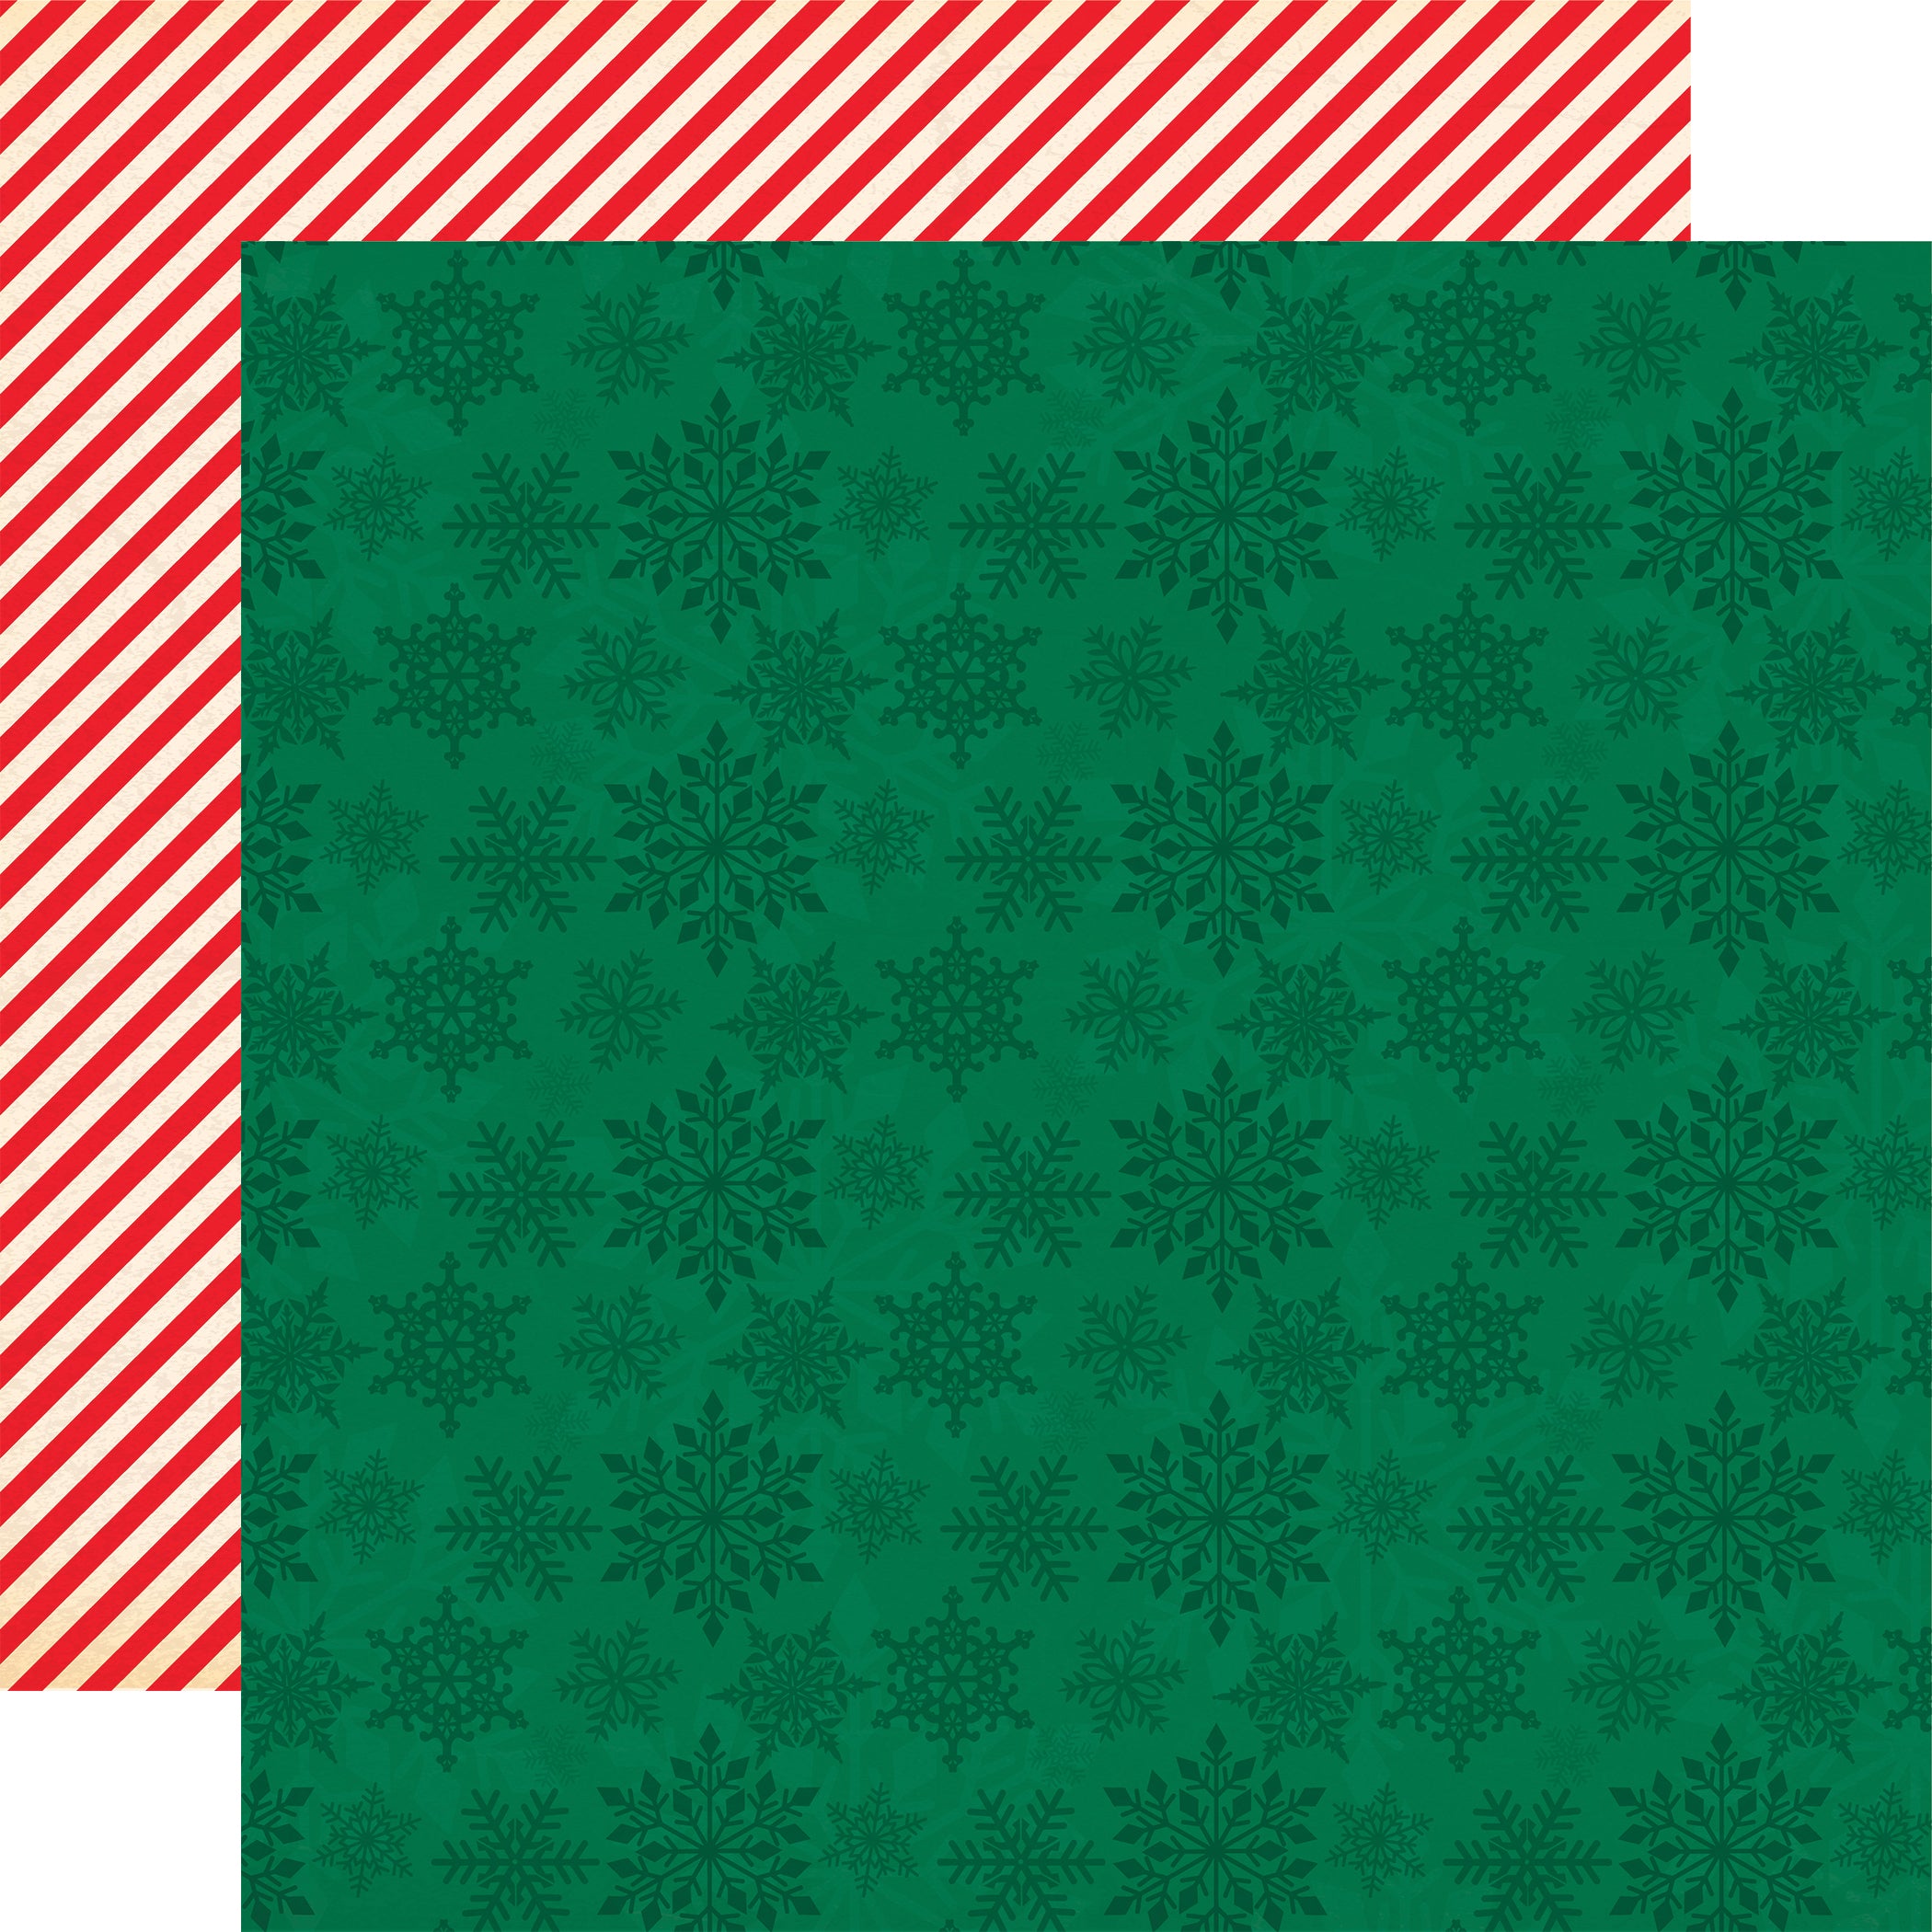 Season's Greetings Collection Snowflake Wishes 12 x 12 Double-Sided Scrapbook Paper by Carta Bella